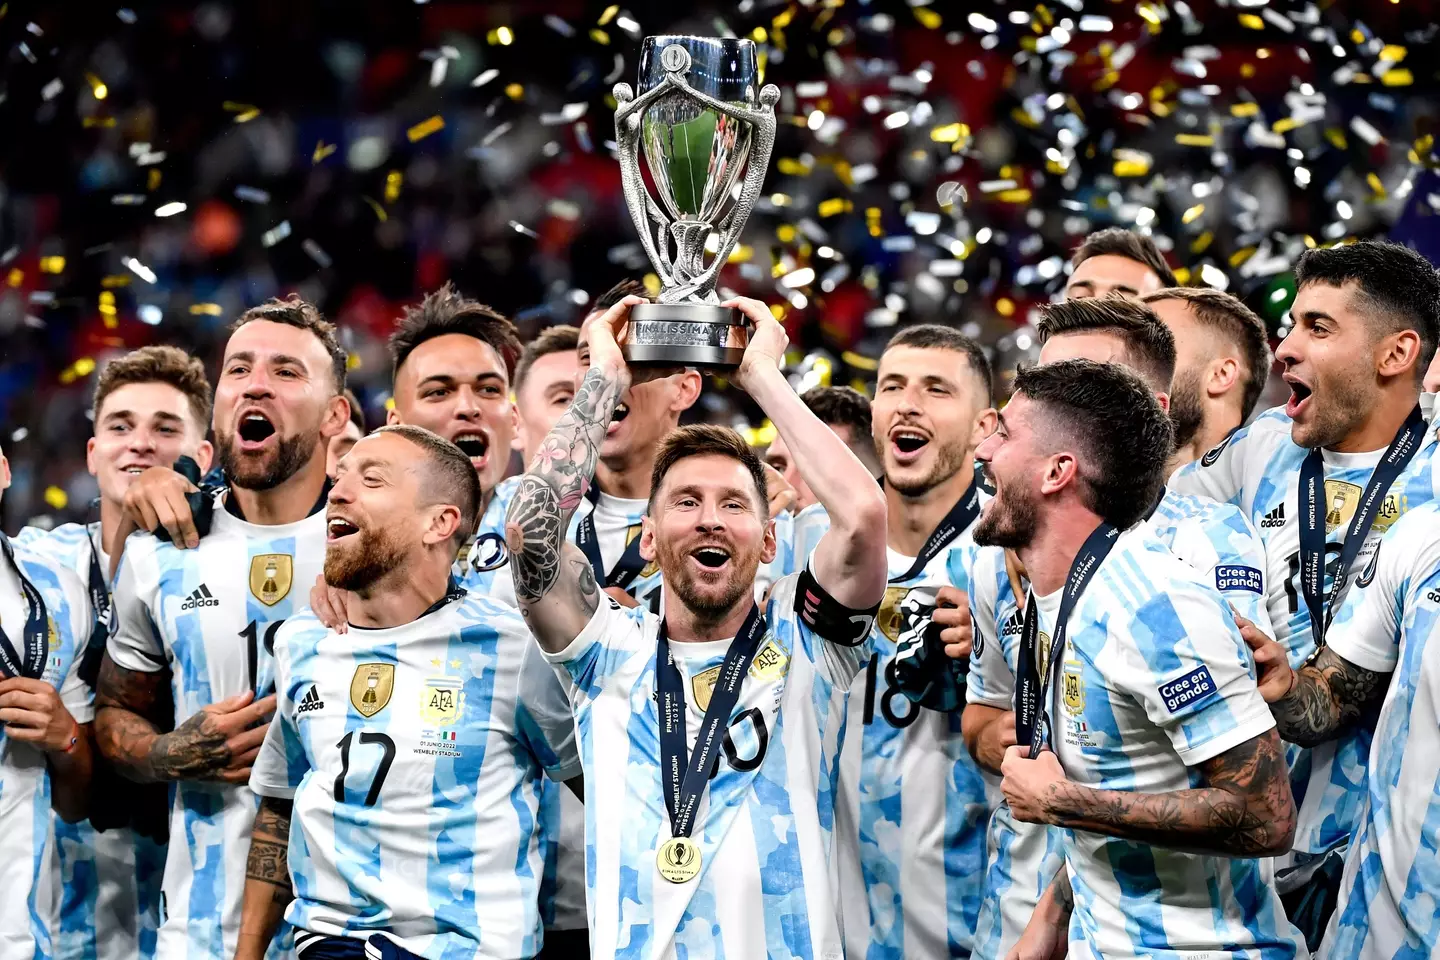 Messi with silverware after Argentina beat Italy. Image: Alamy